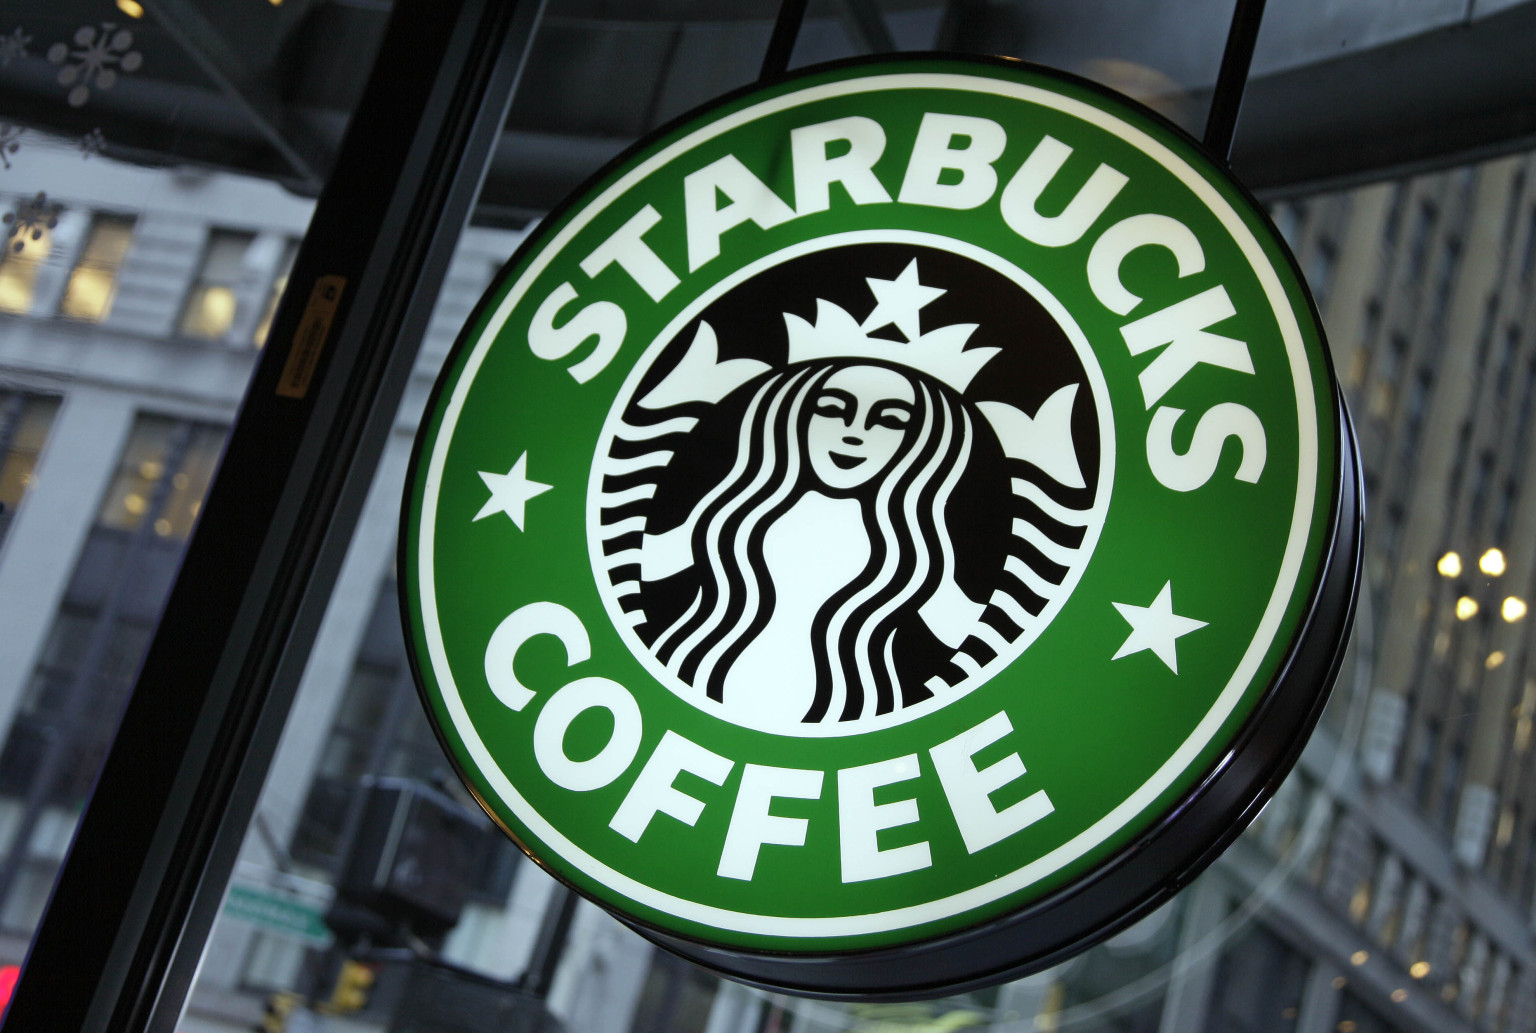 Starbucks Canada Online Store Offers This Week Only, FREE